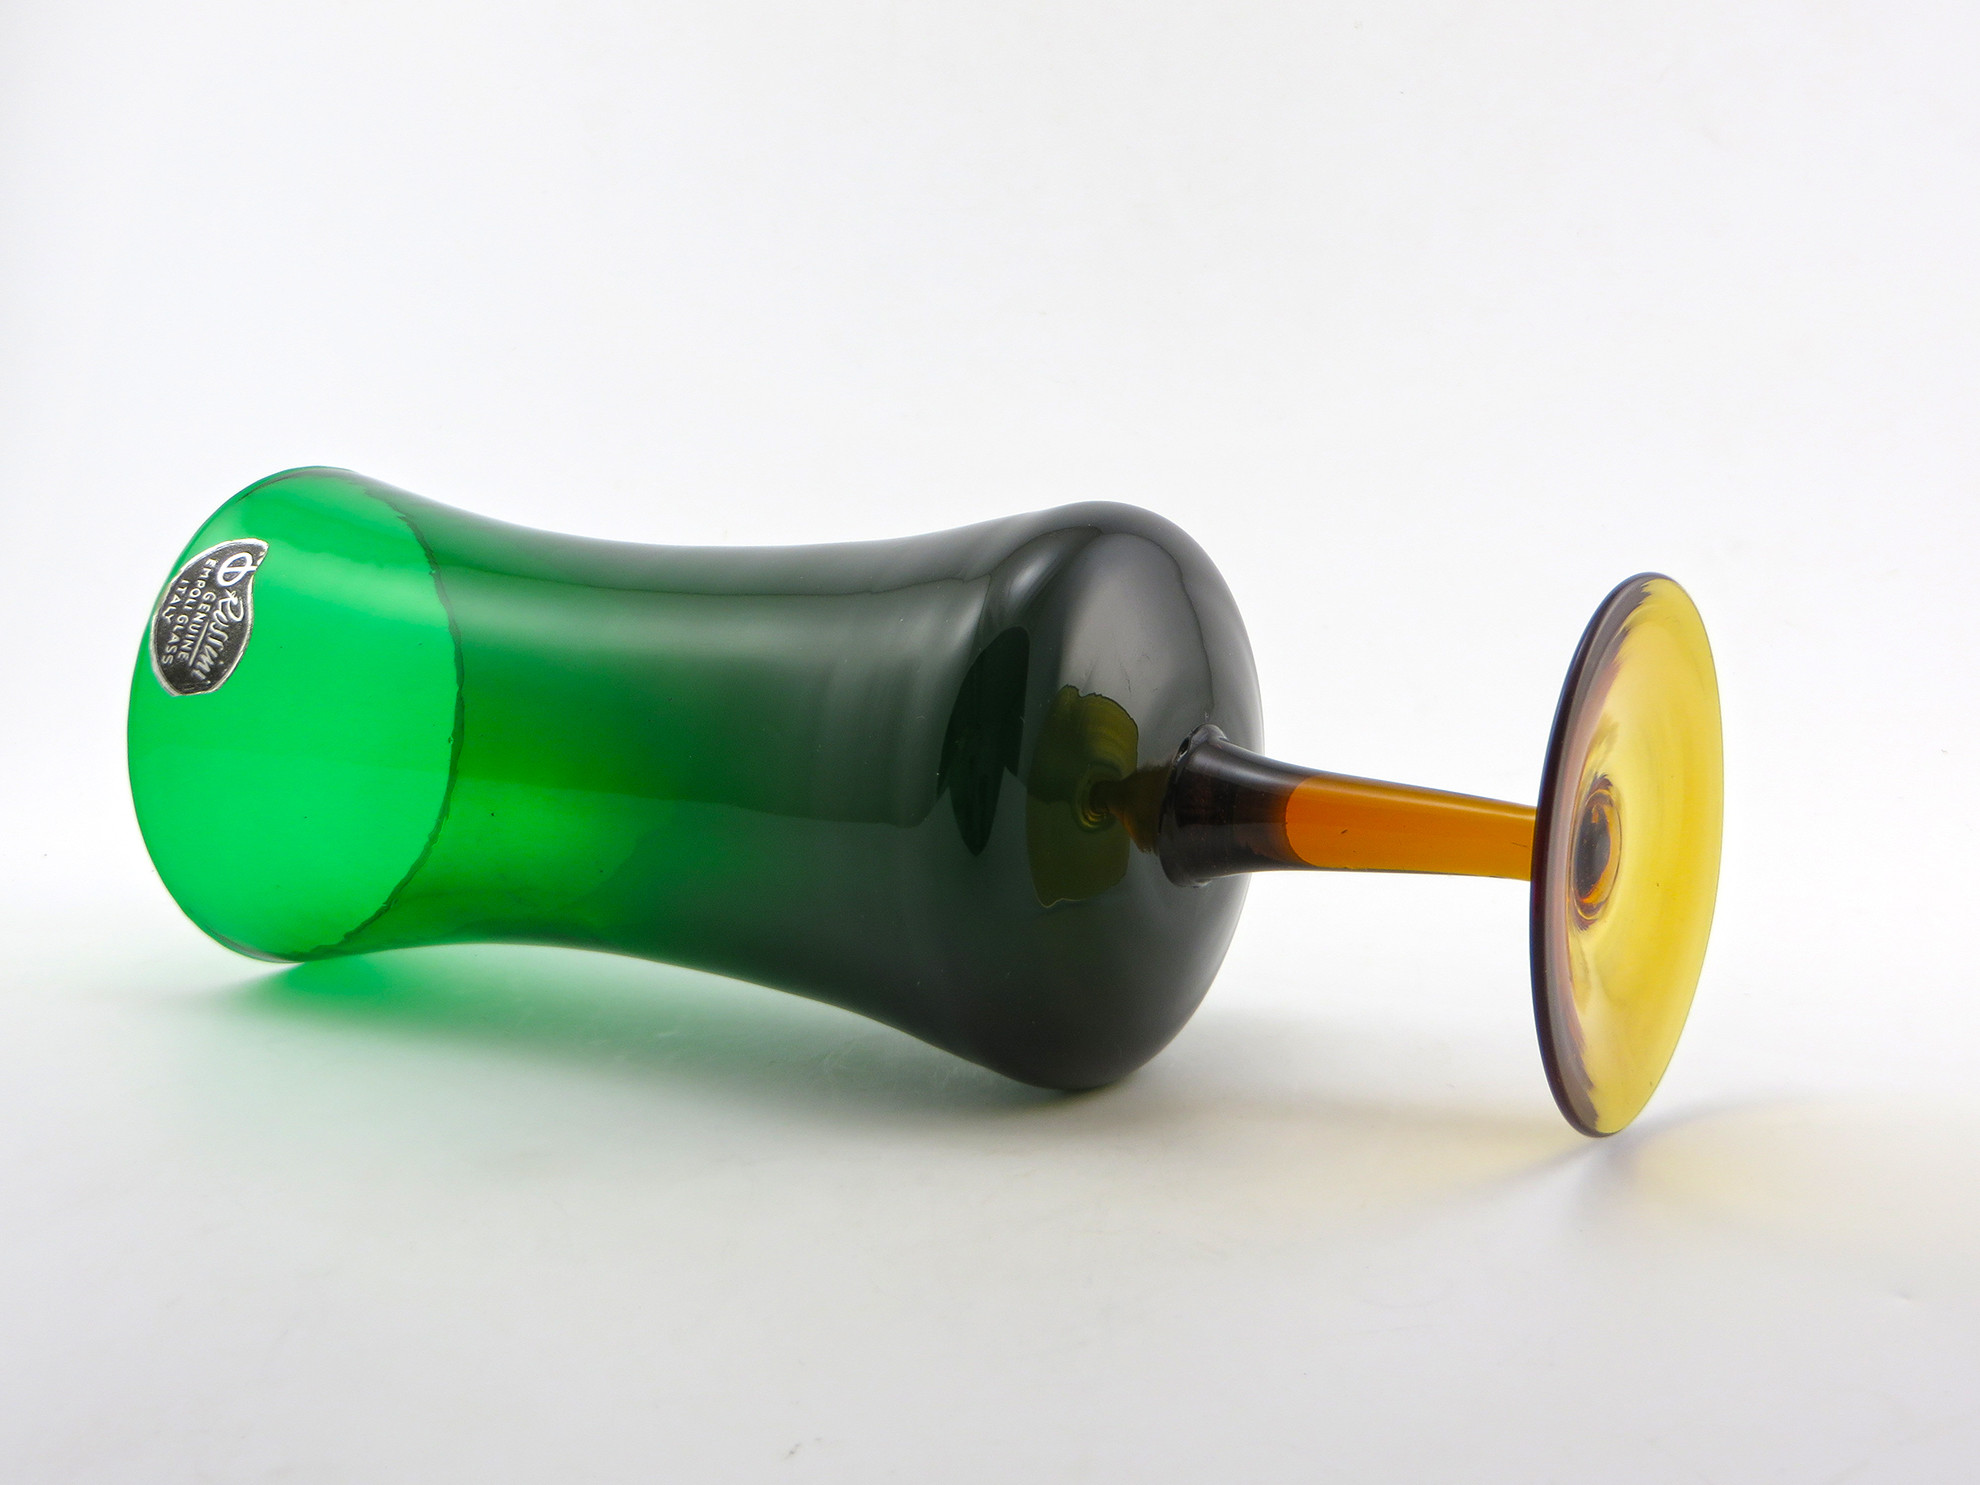 green blown glass vase of rossini empoli art glass retro modern vase with label retro art glass with the dark amber foot was hand formed and applied to the stem which was